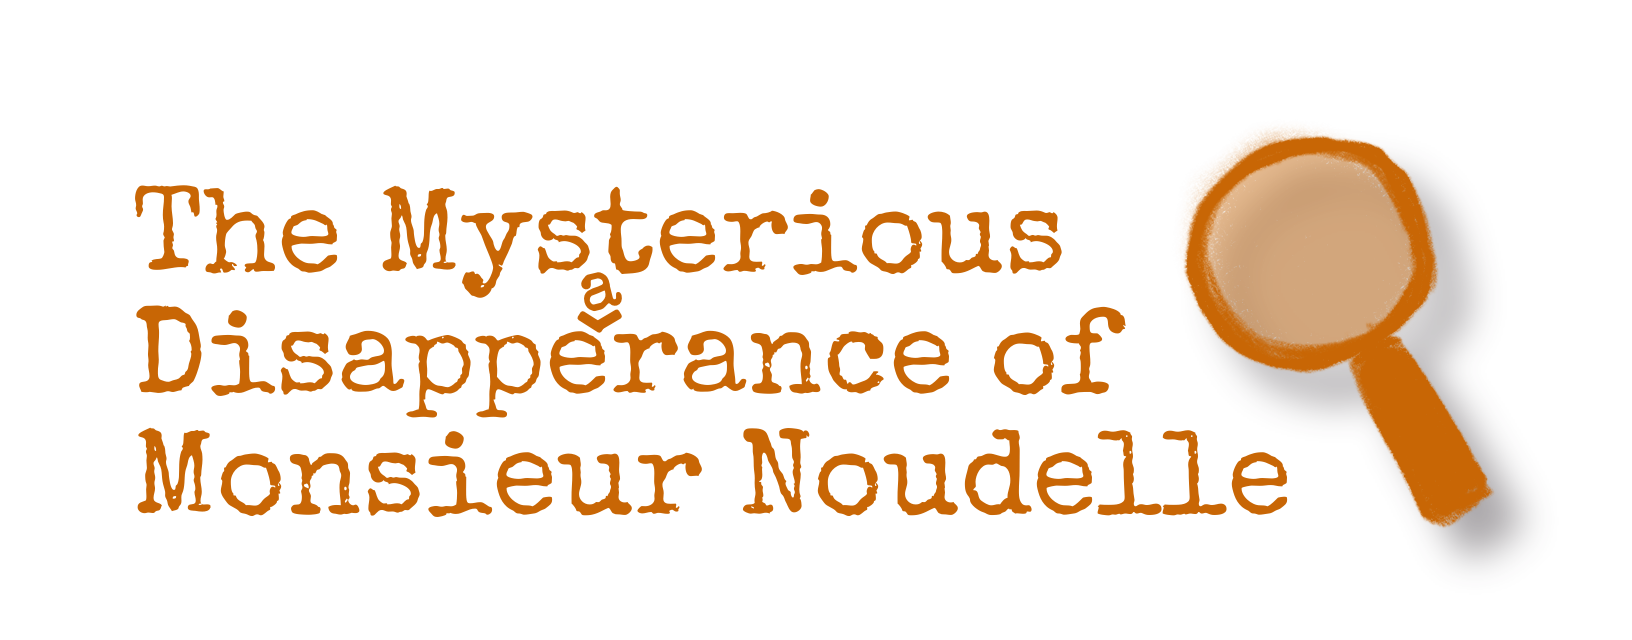 The Mysterious Disappearance of Monsieur Noudelle